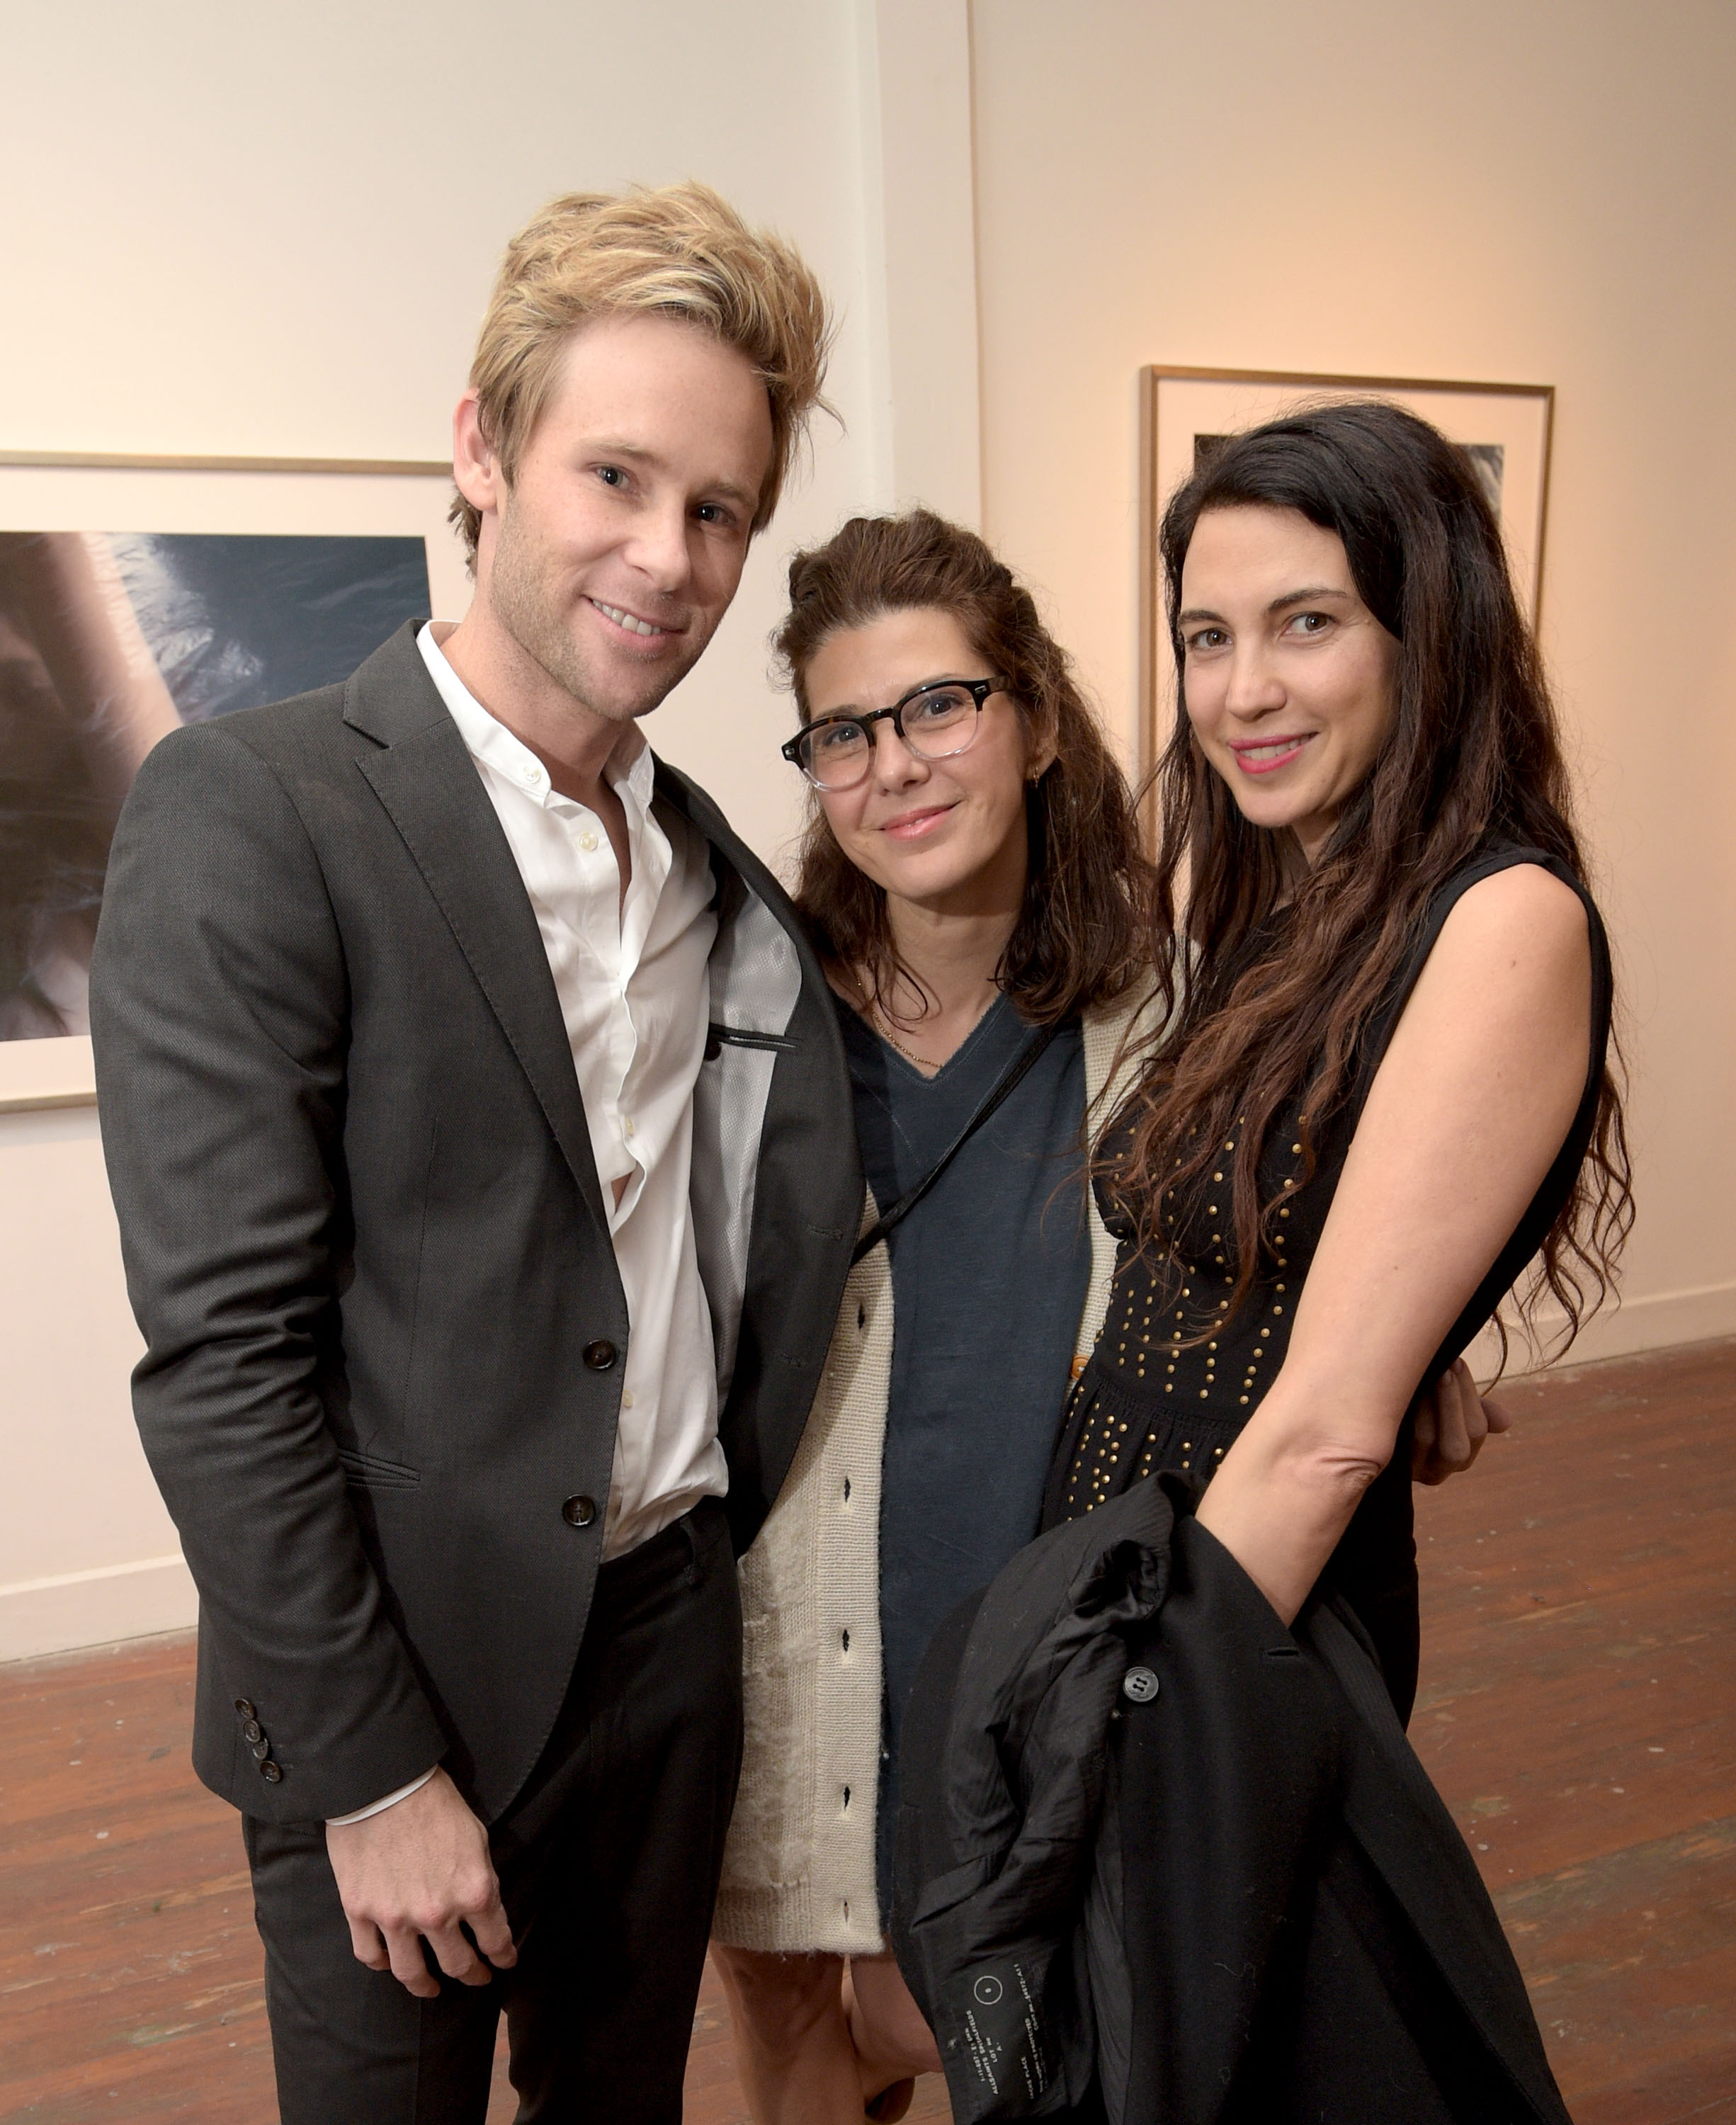 LOS ANGELES, CA - MAY 09: (L-R) Artist Bryan Fox, actresses Marisa Tomei, and Shiva Rose attend We. Alone. a photography exhibit by Bryan Fox at Think Tank Gallery on May 9, 2015 in Los Angeles, California.